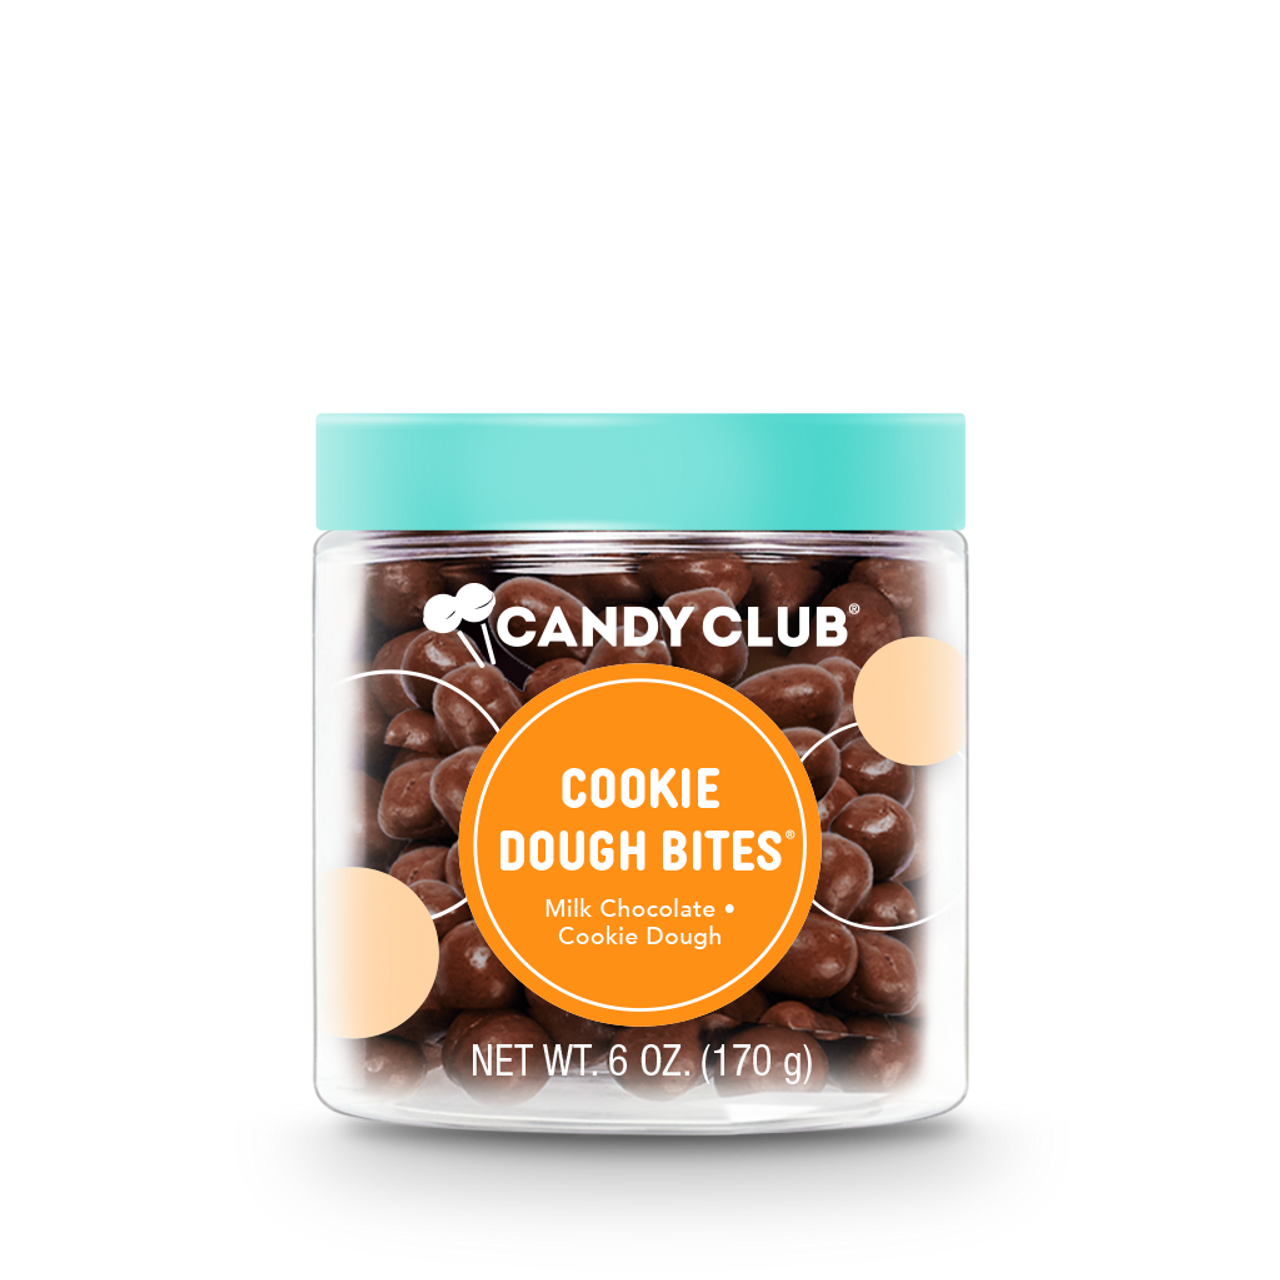 https://cdn11.bigcommerce.com/s-wp1youxqtj/images/stencil/1280x1280/products/261/1885/Cookie_Dough_Bites_RS1611-00-28_Lid__63227.1694122436.png?c=2?imbypass=on